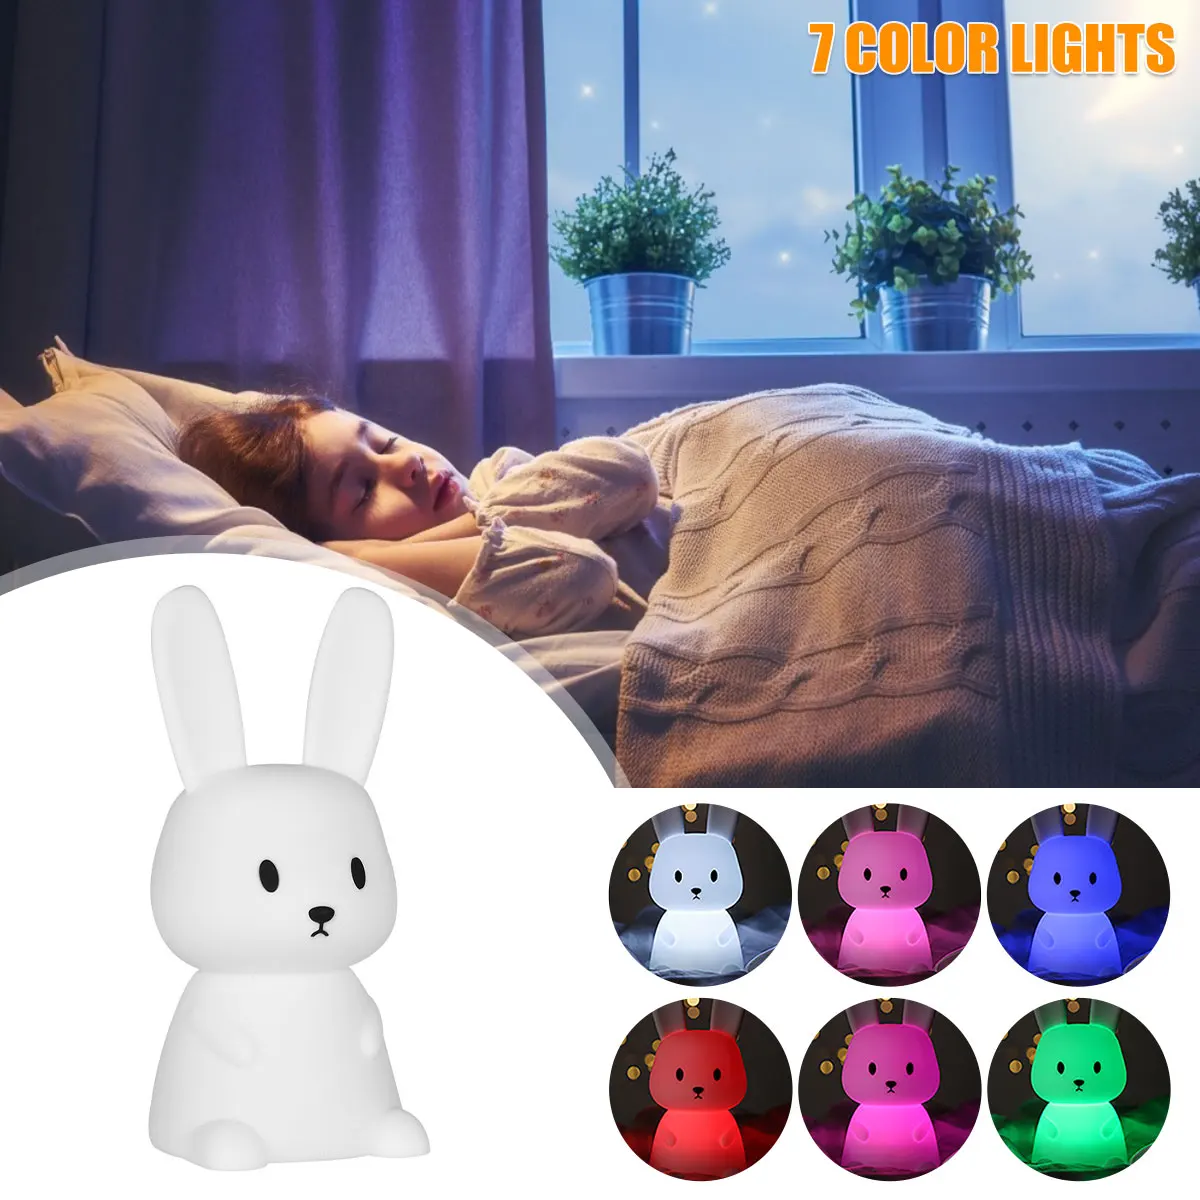 

New LED Silicone Night Light Touch Sensor Switching Pat Lamp Cute Rabbit Nursery Lamp Battery Powered USB Bedside Desk Lamp with